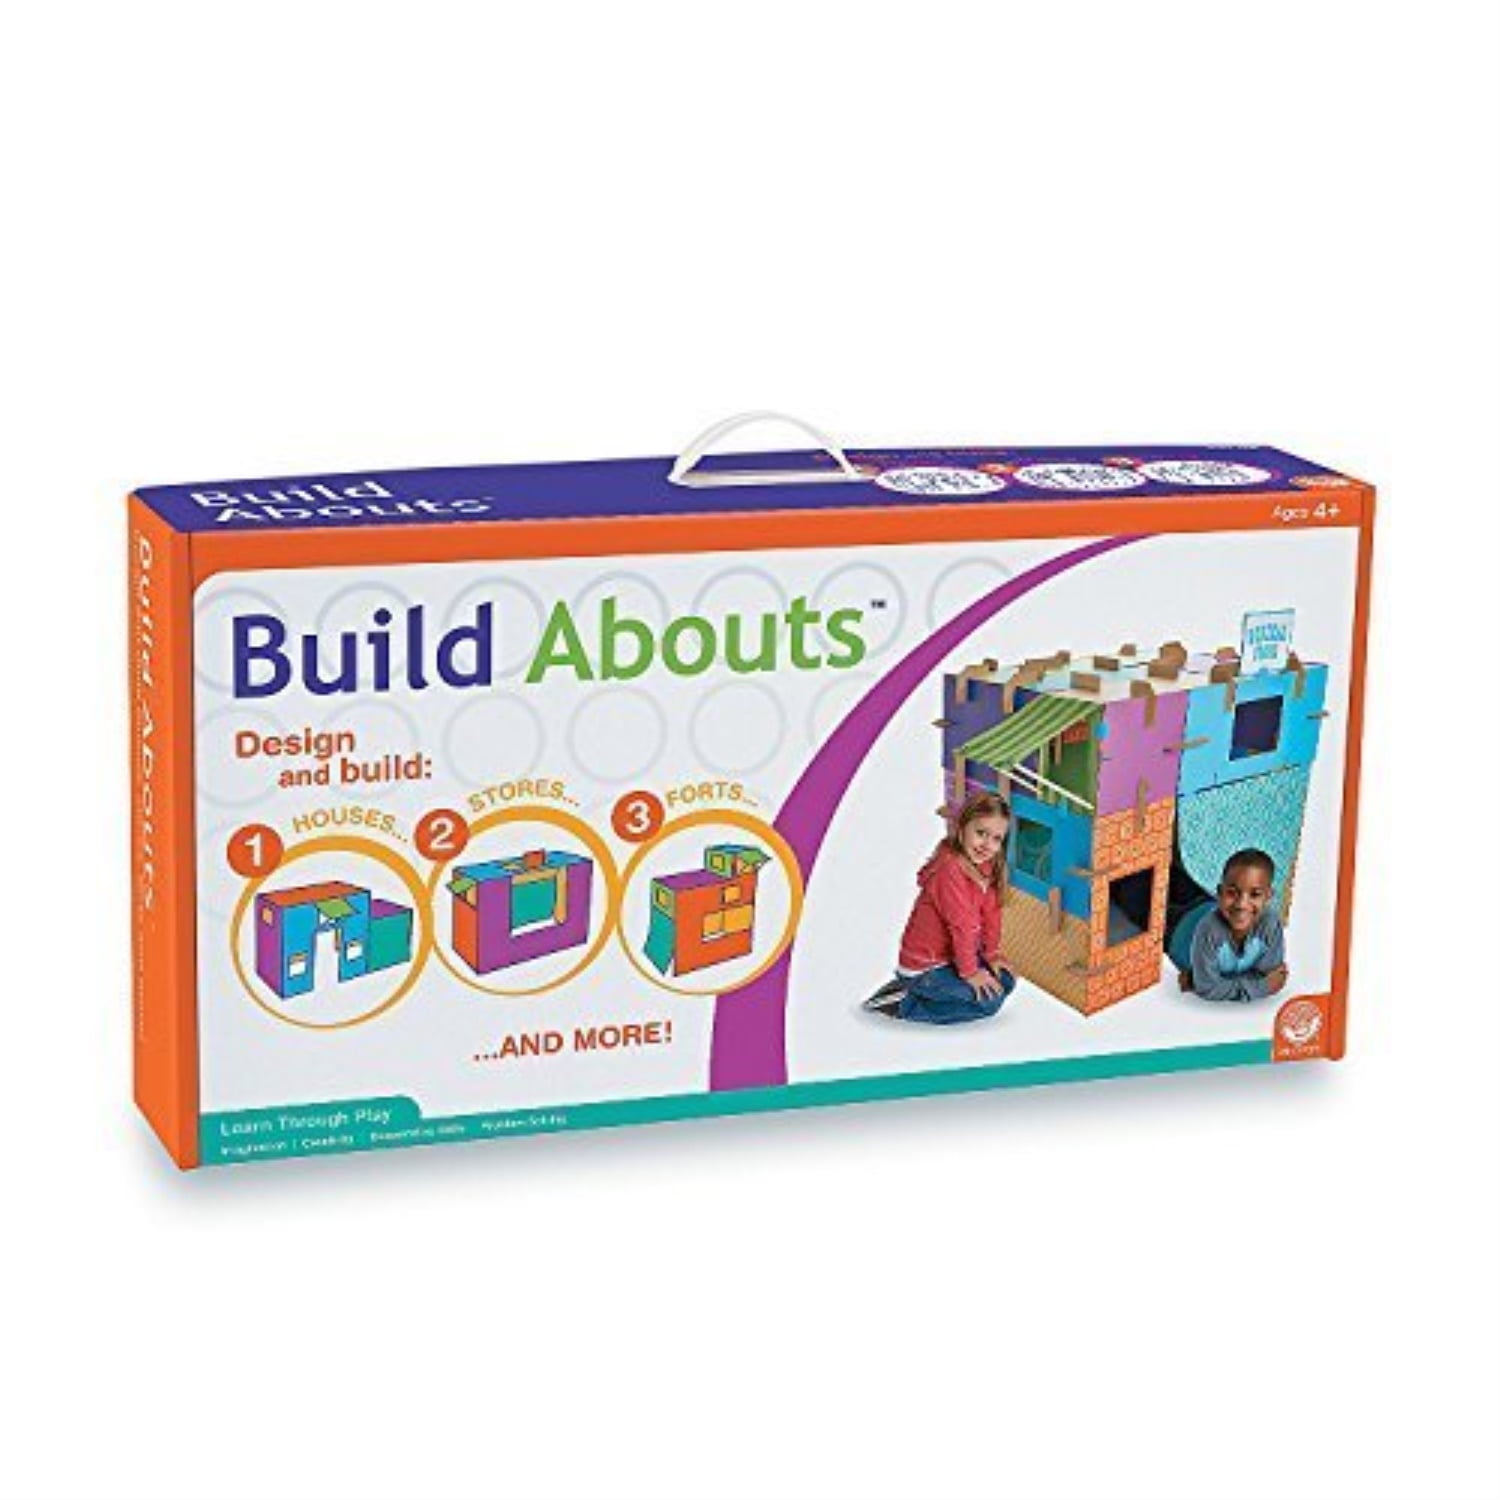 Build-Abouts Modular Fort Kit